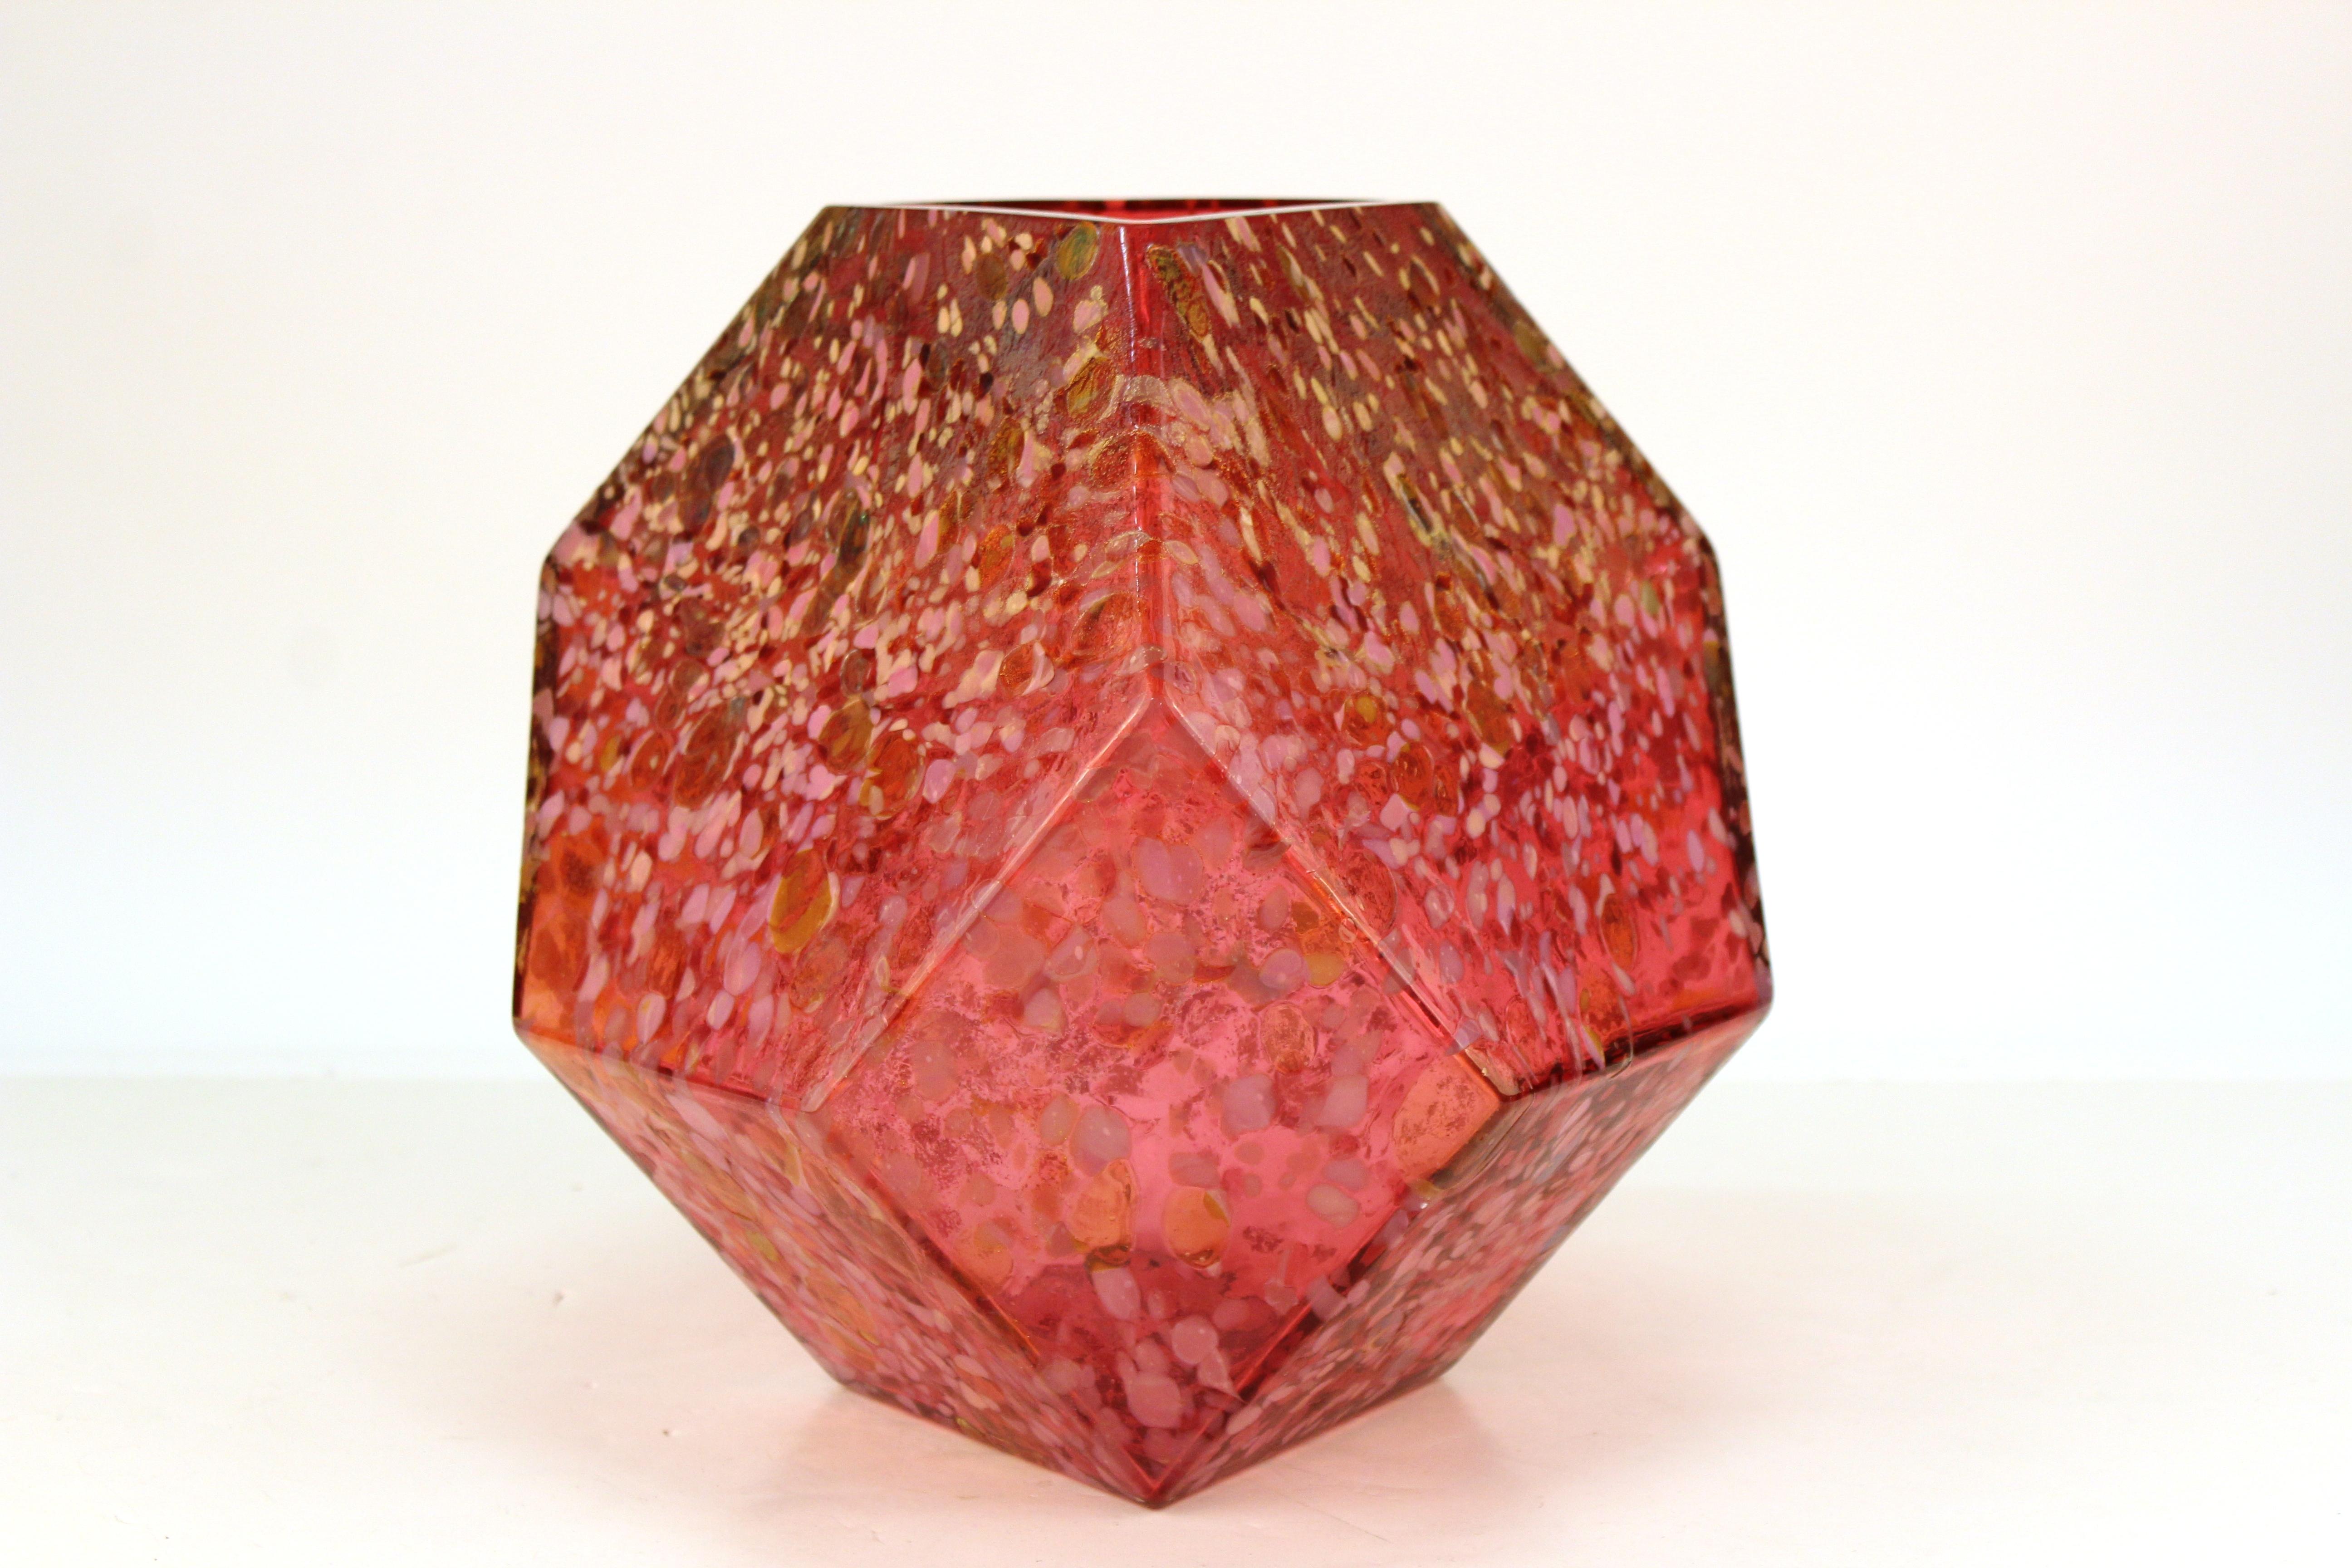 Geometric style modern faceted art glass sculpture or vase, created by New-York based artist John Torreano (b. 1941) in the late 20th century. The piece has remarkable translucent effects due to the use of various incorporated color elements within